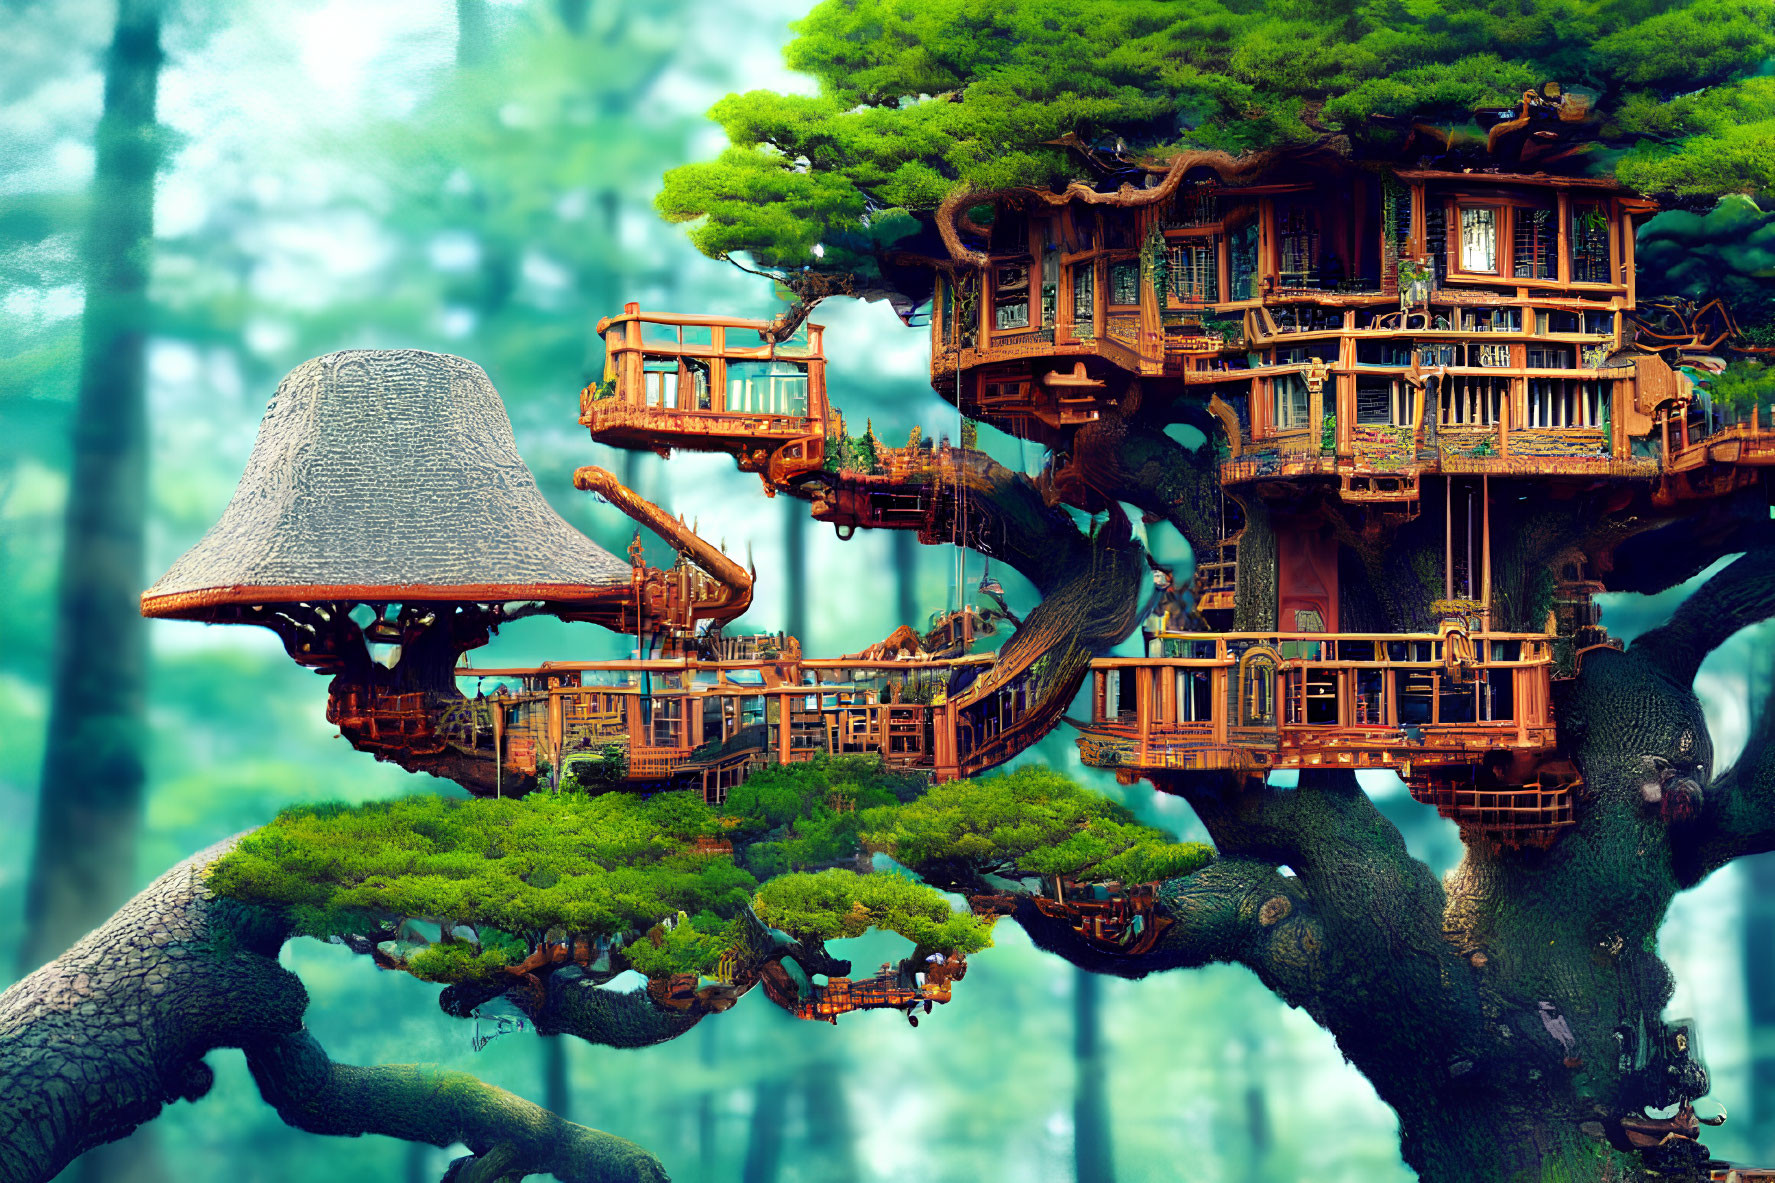 Intricate wooden architecture in fantastical treehouse amid lush forest